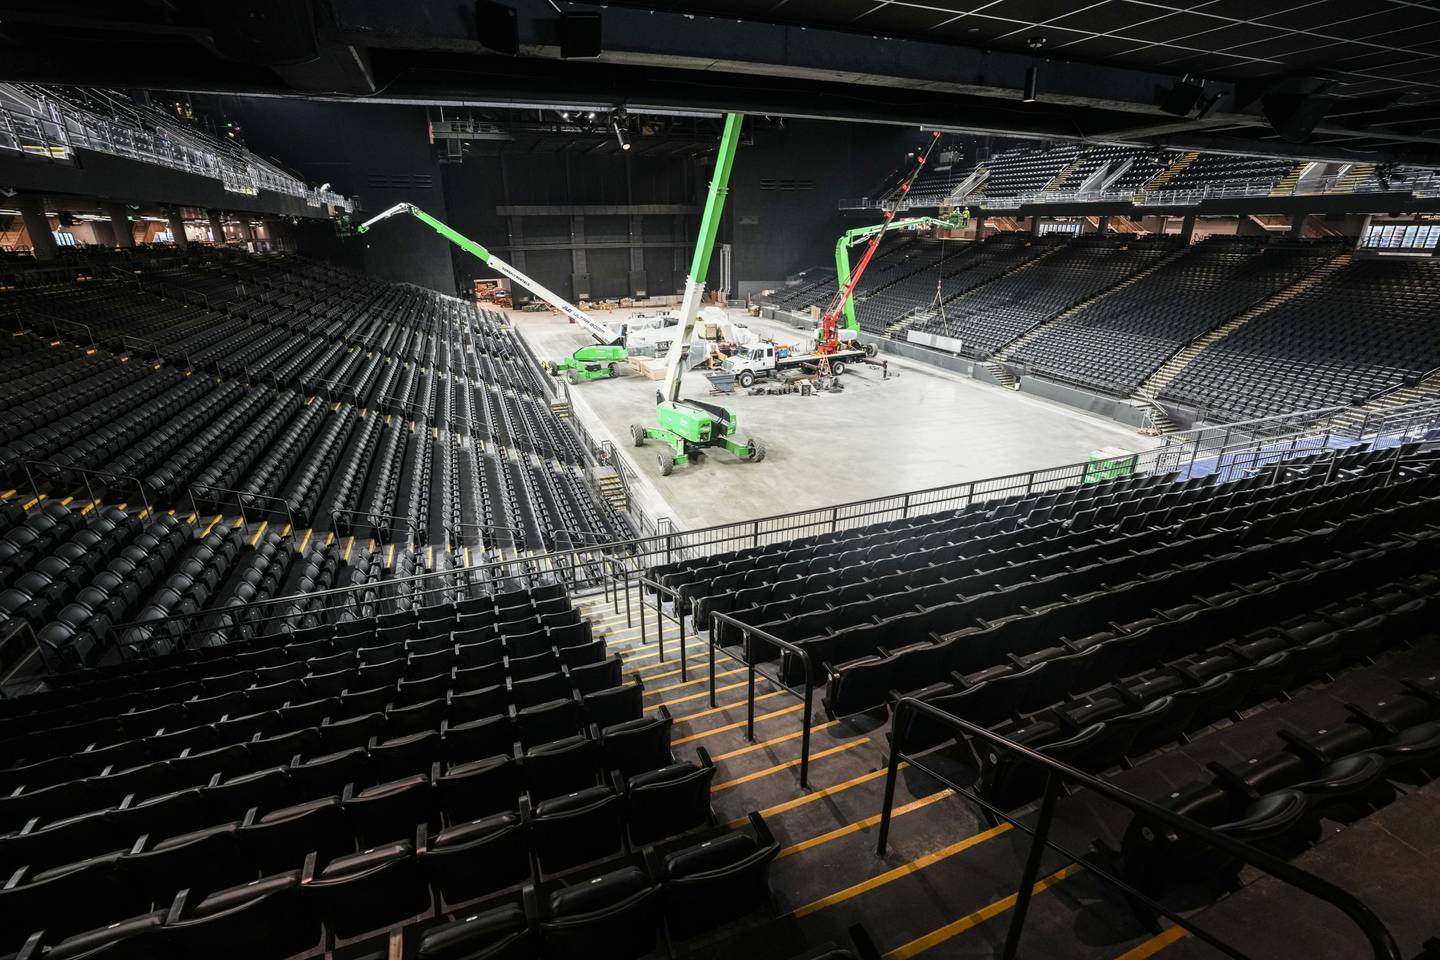 Scenes of the newly renovated CFG Bank Arena, set to open in April 2023.